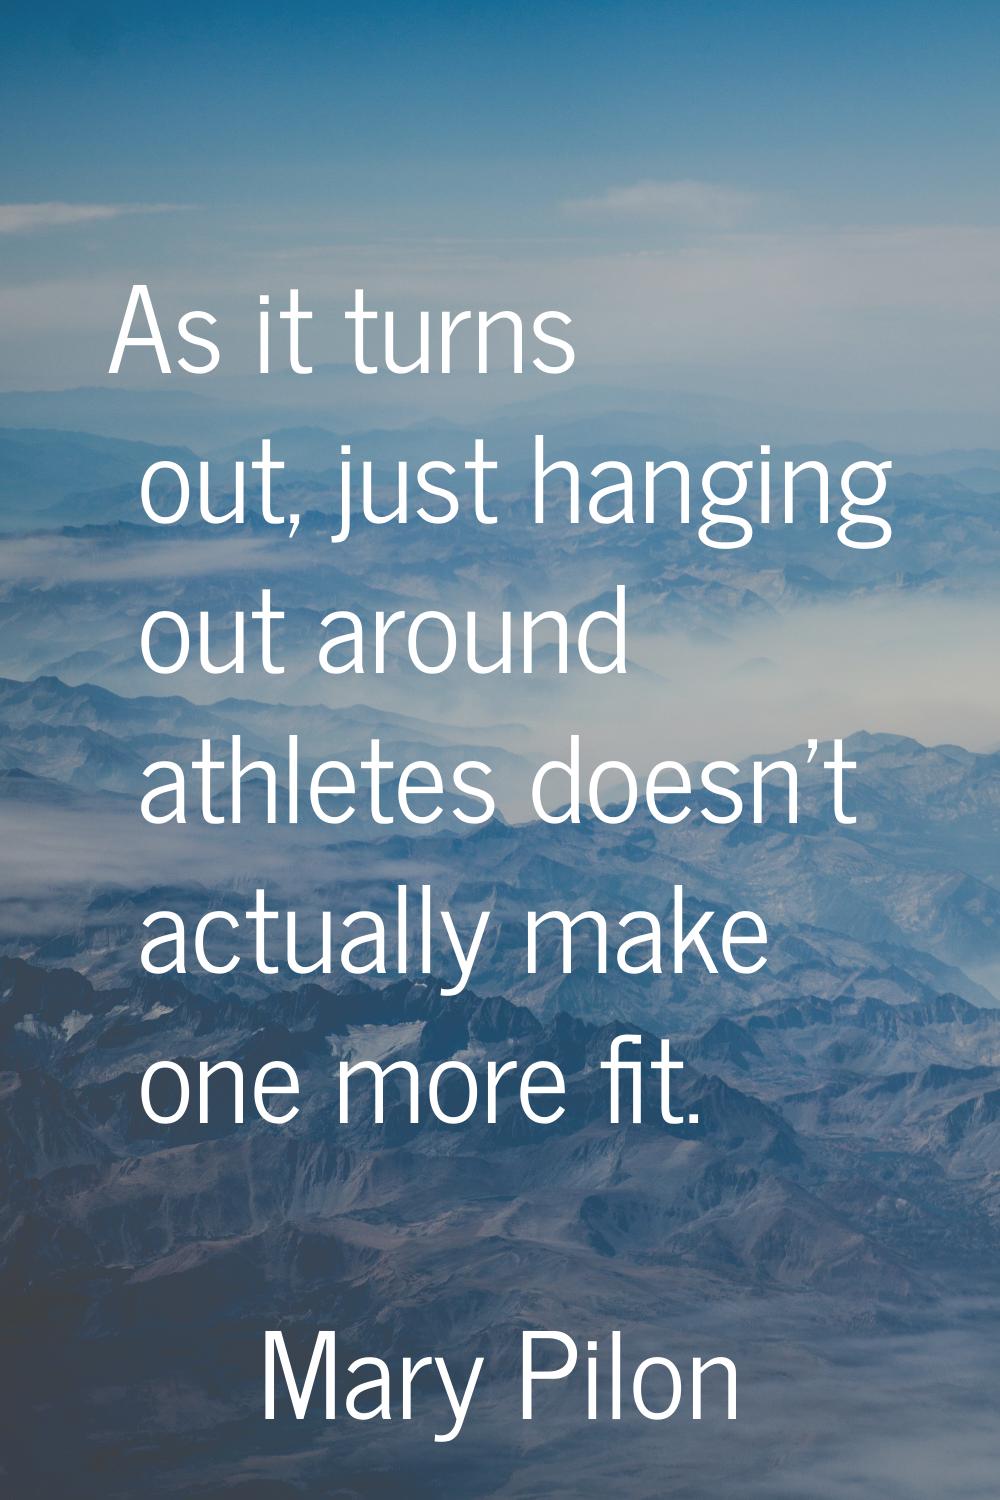 As it turns out, just hanging out around athletes doesn't actually make one more fit.